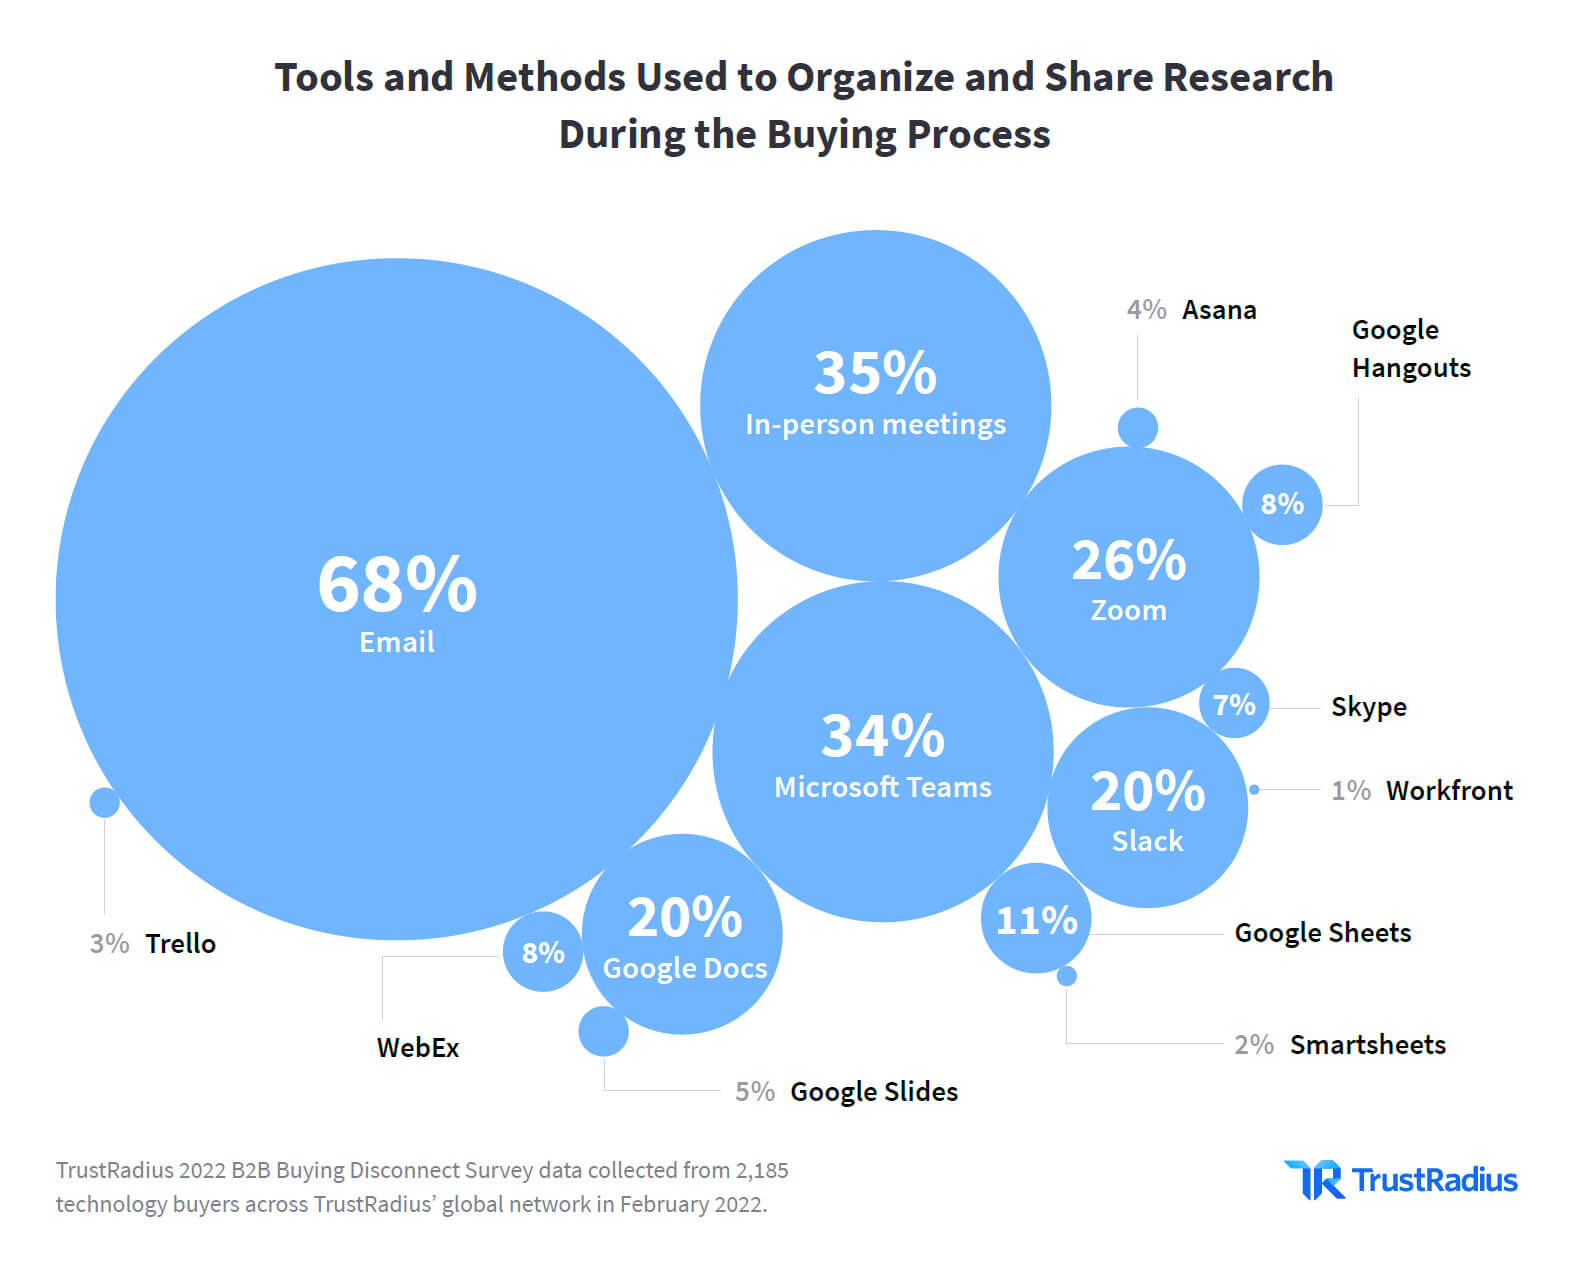 Tools and methods use to organize and share research during the buying process